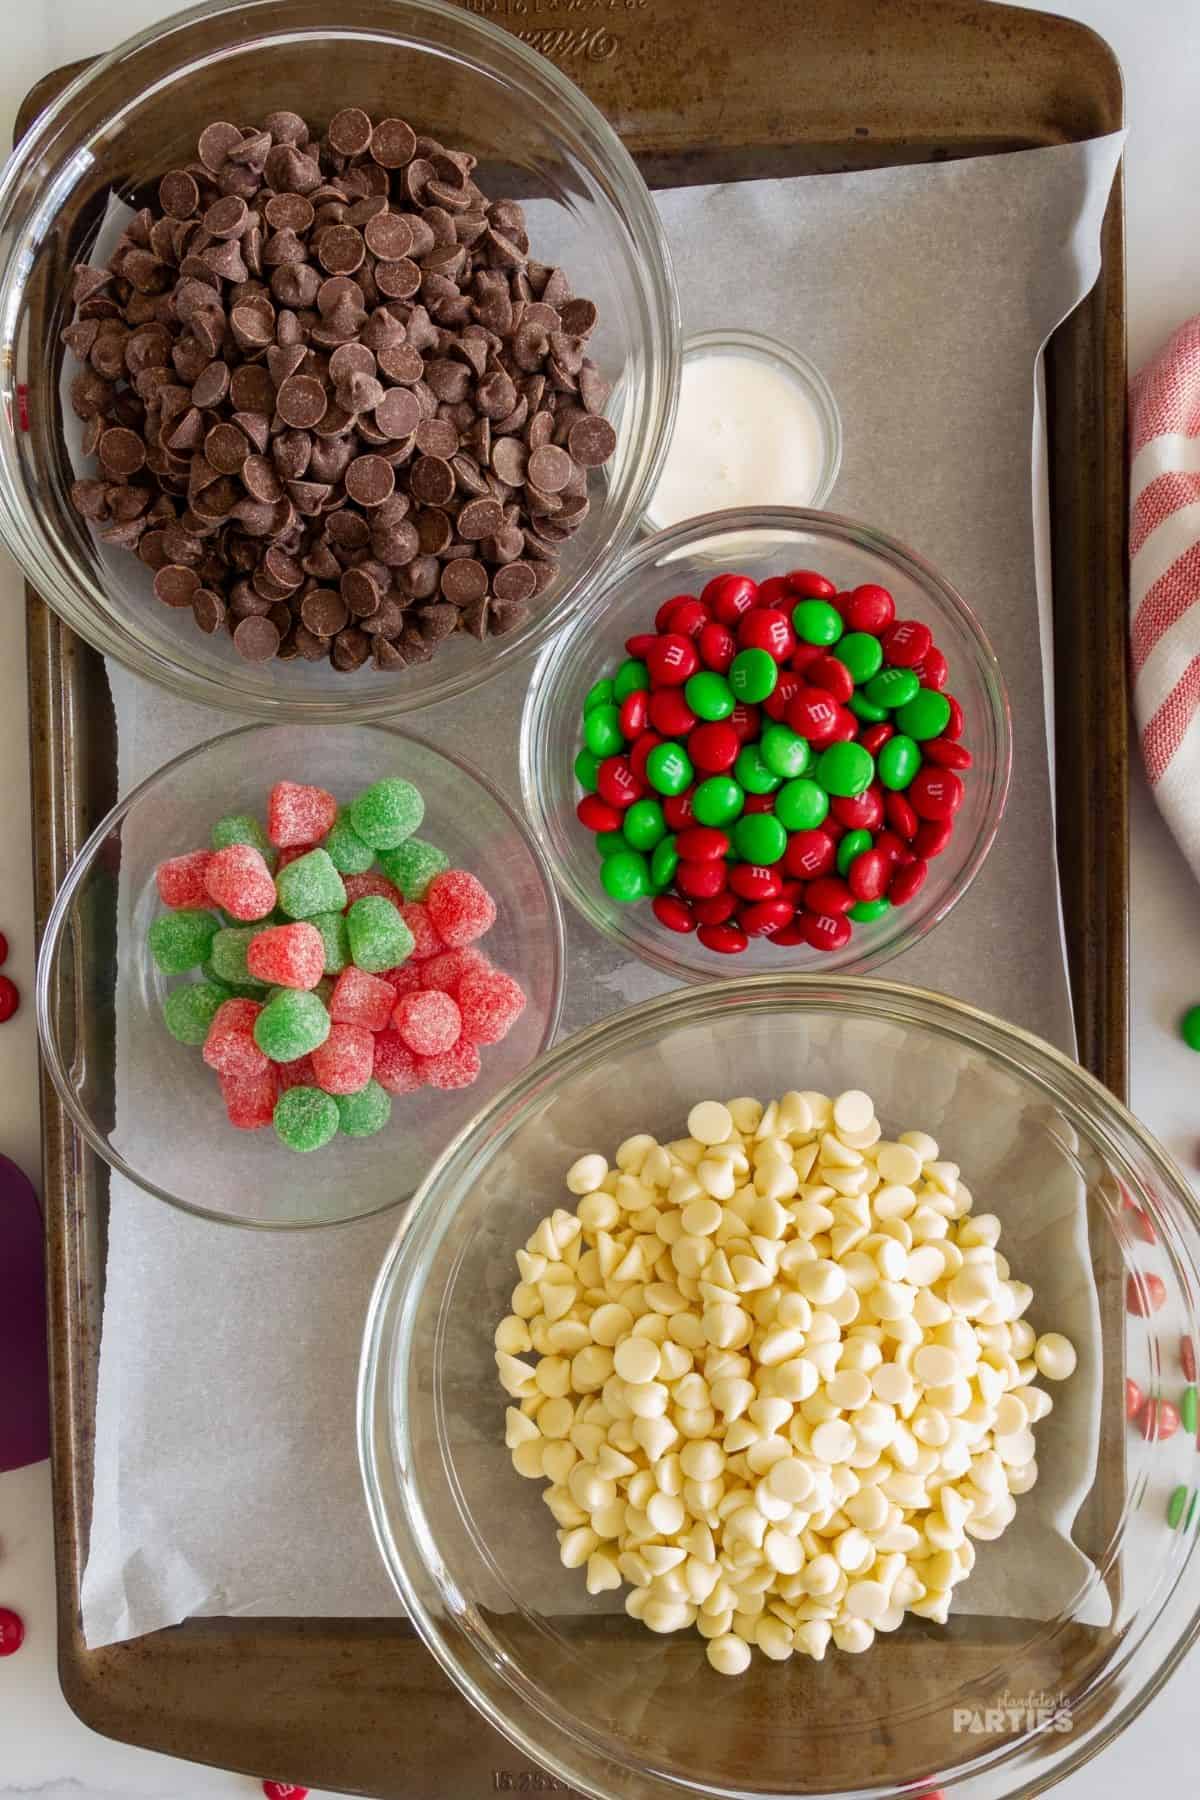 Ingredients for Colorful Christmas Bark Candy.